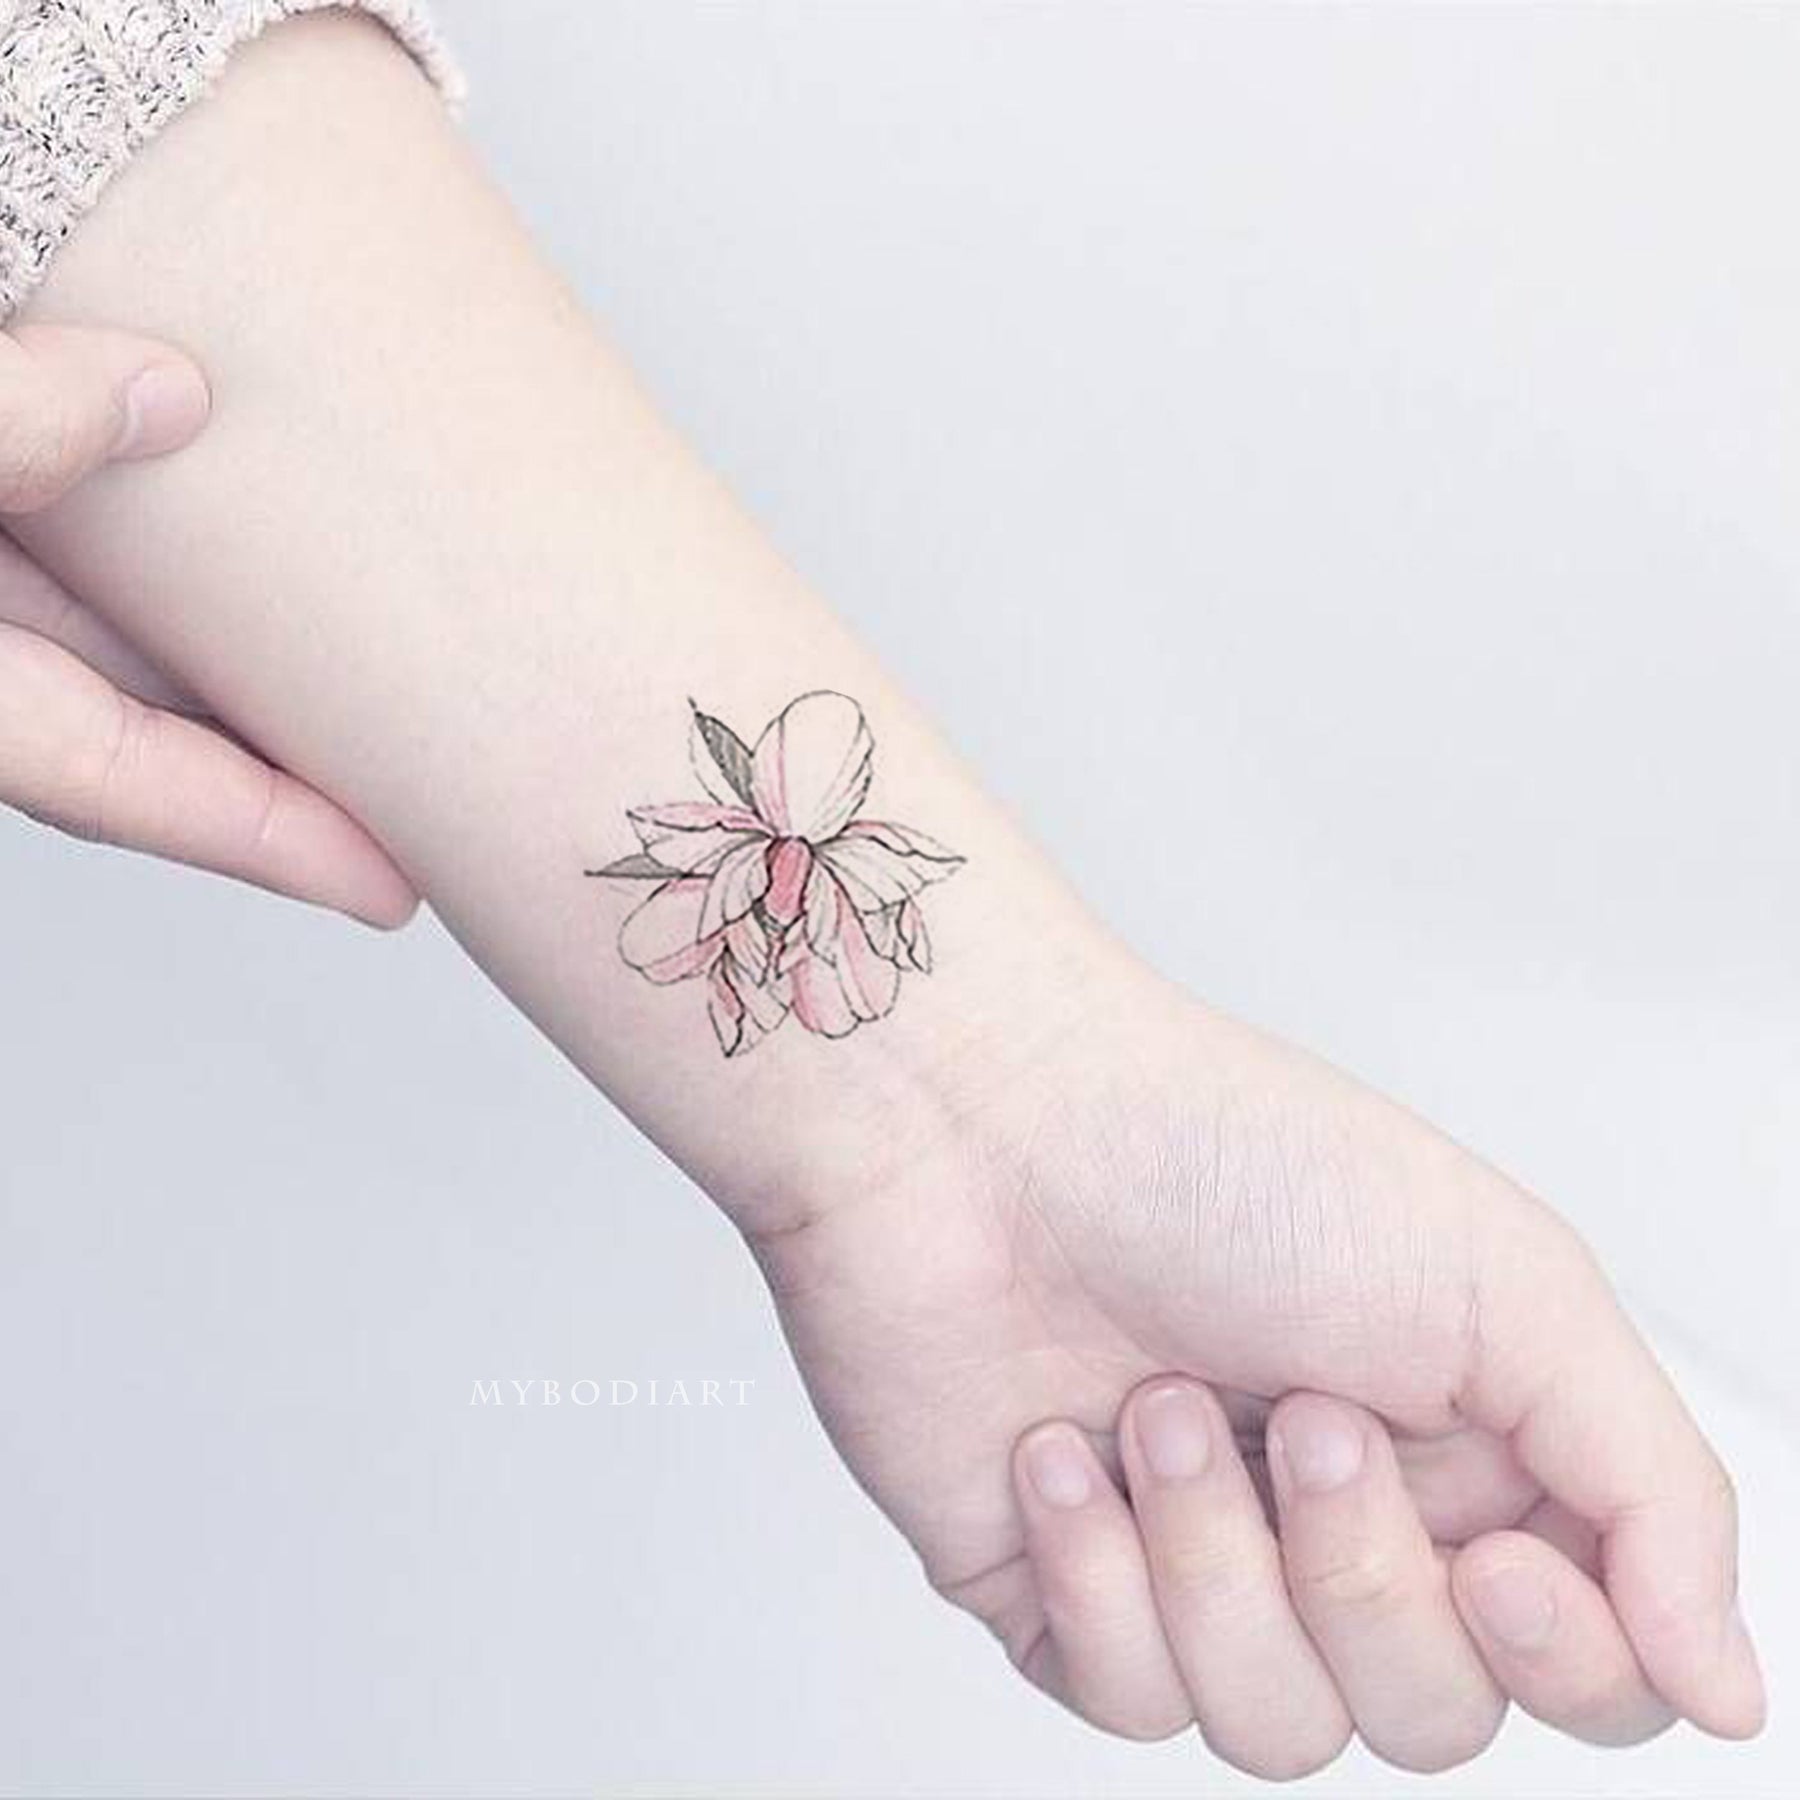 Light and airy floral tattoo | Feminine shoulder tattoos, Flower tattoo  shoulder, Mastectomy tattoo